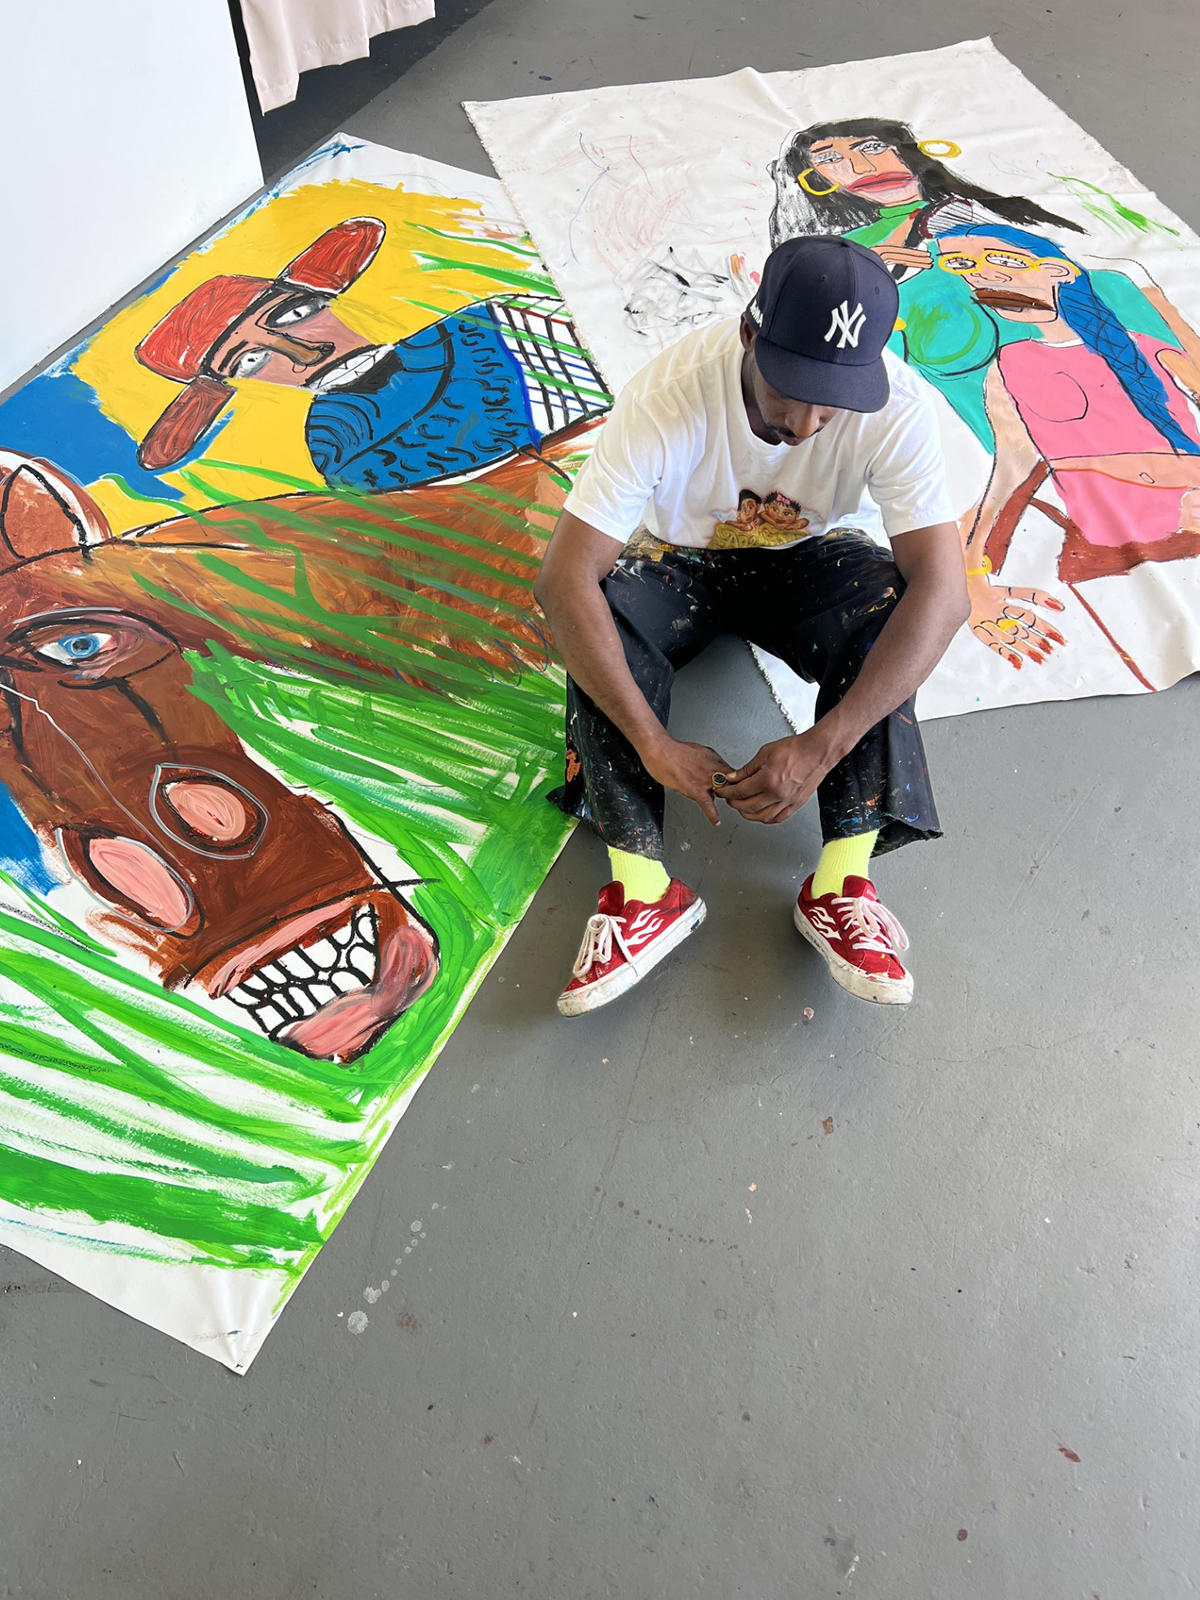 A man sitting on the floor surrounded by artworks